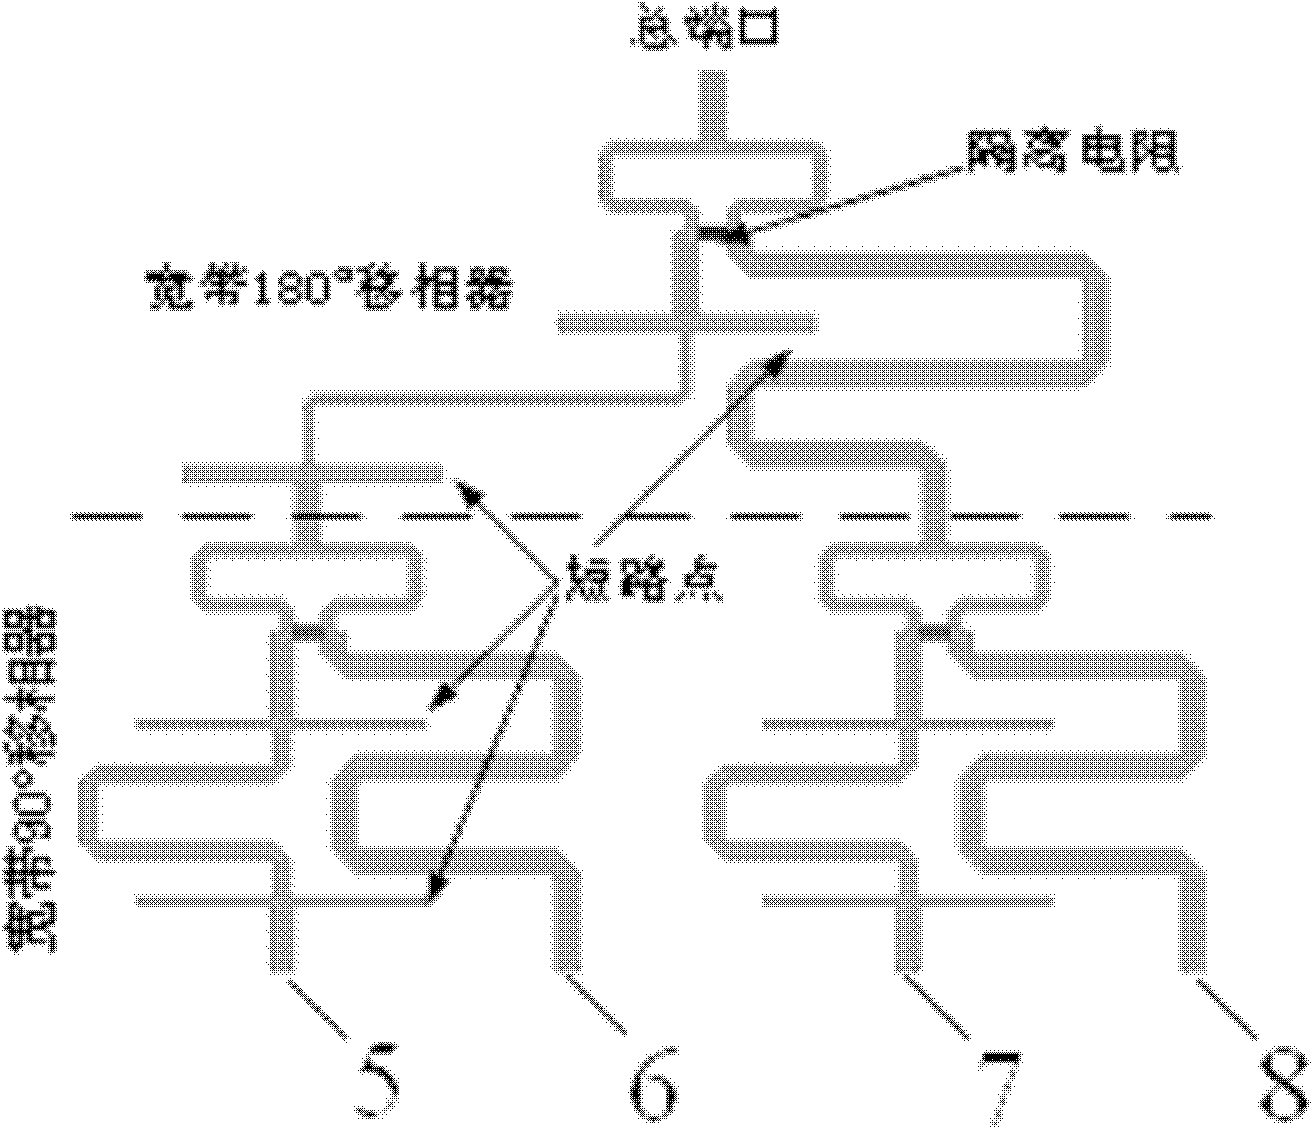 Circularly polarized multimode wideband antenna and microstrip power division phase shift network